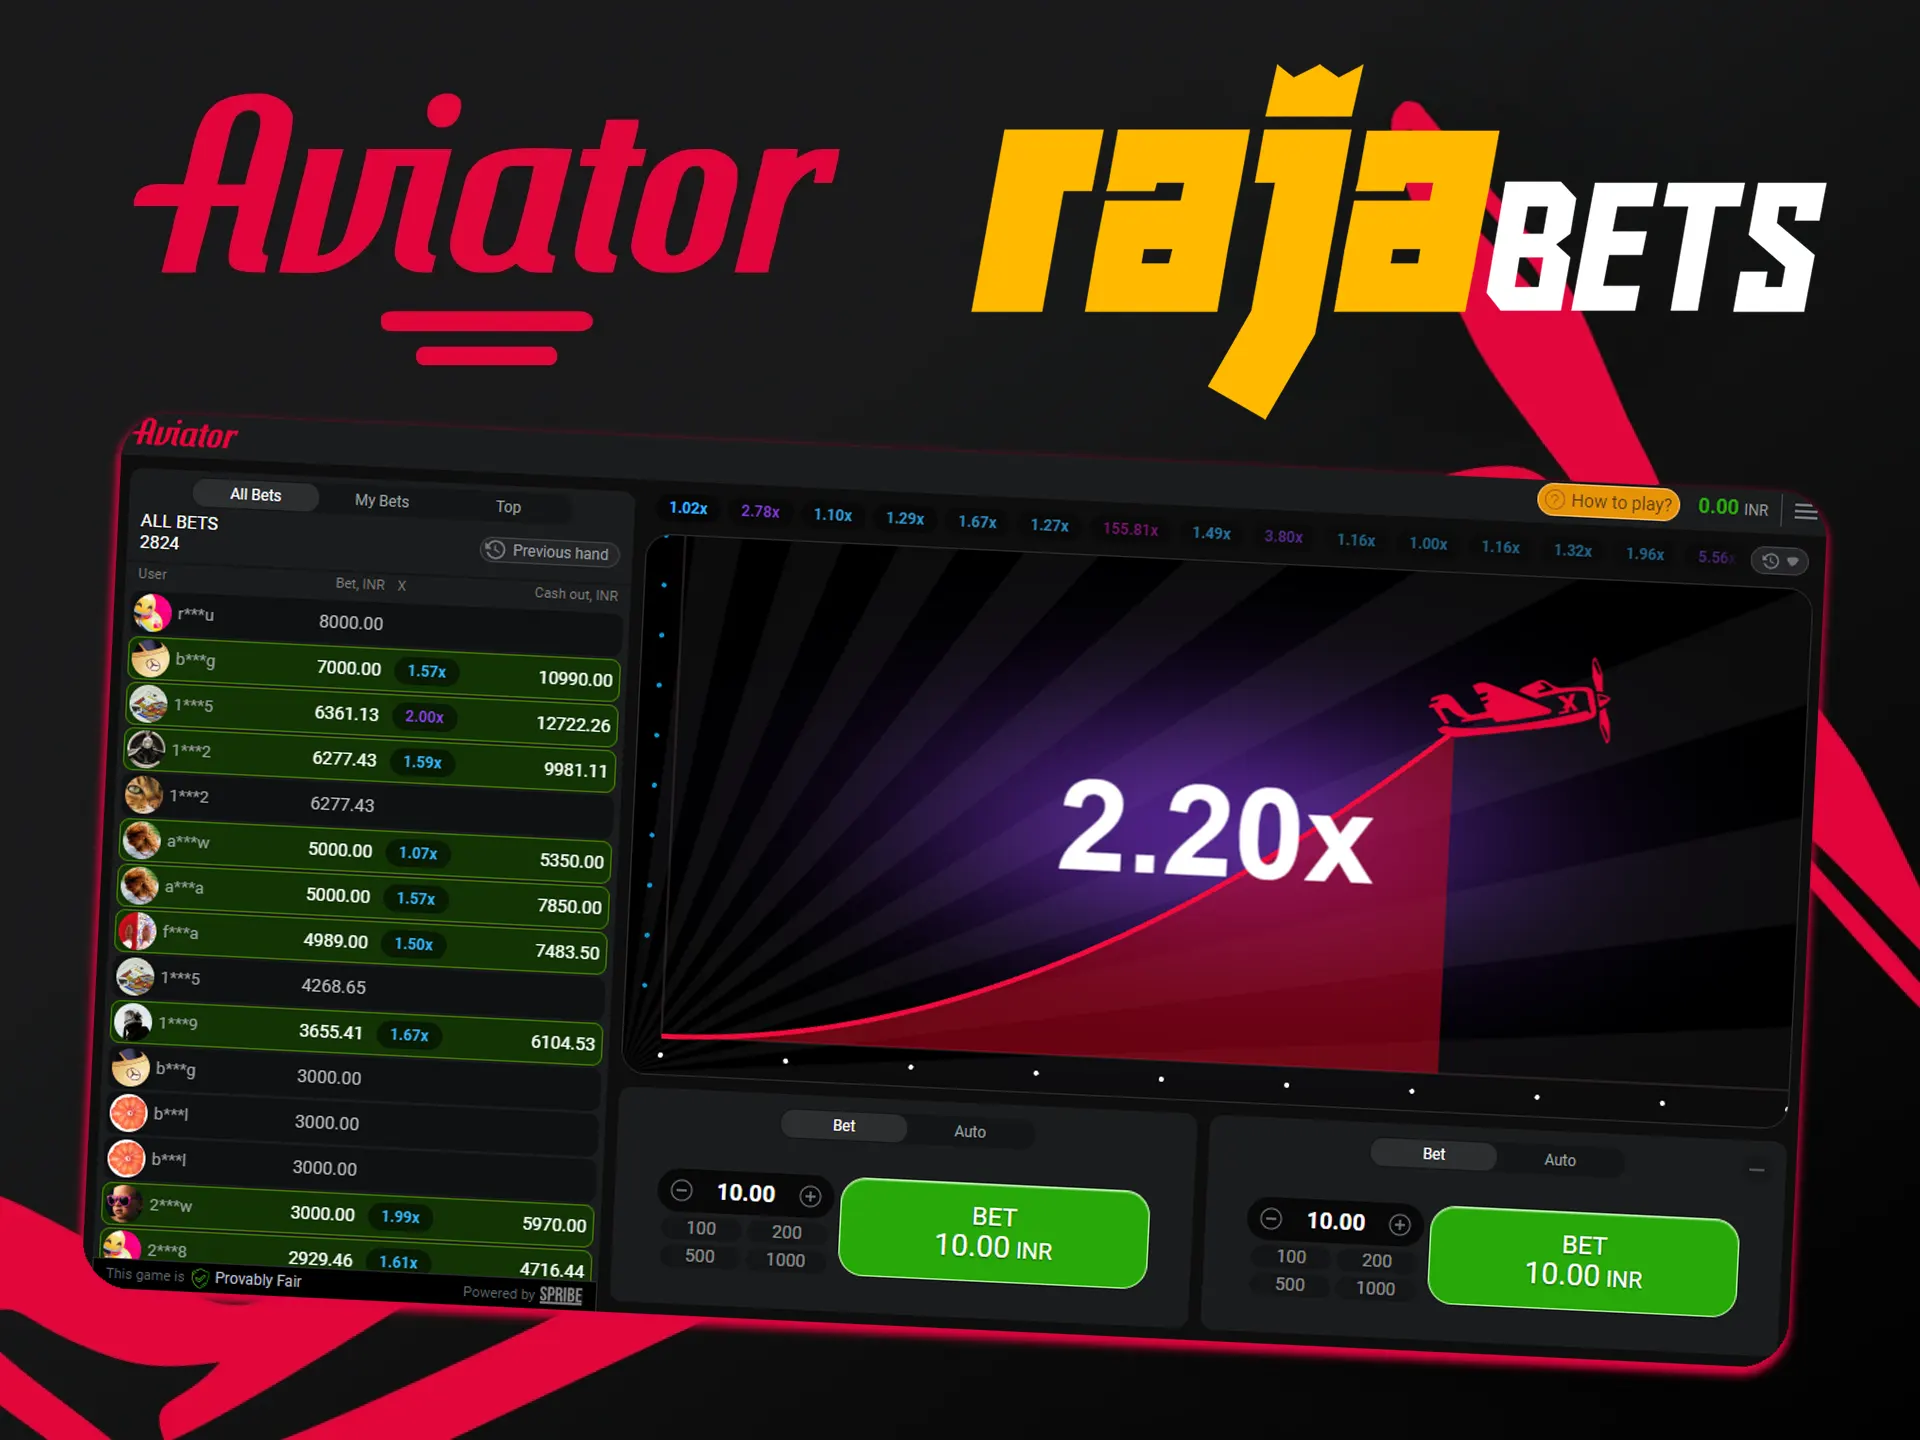 Win money by playing Aviator game at Rajabets.